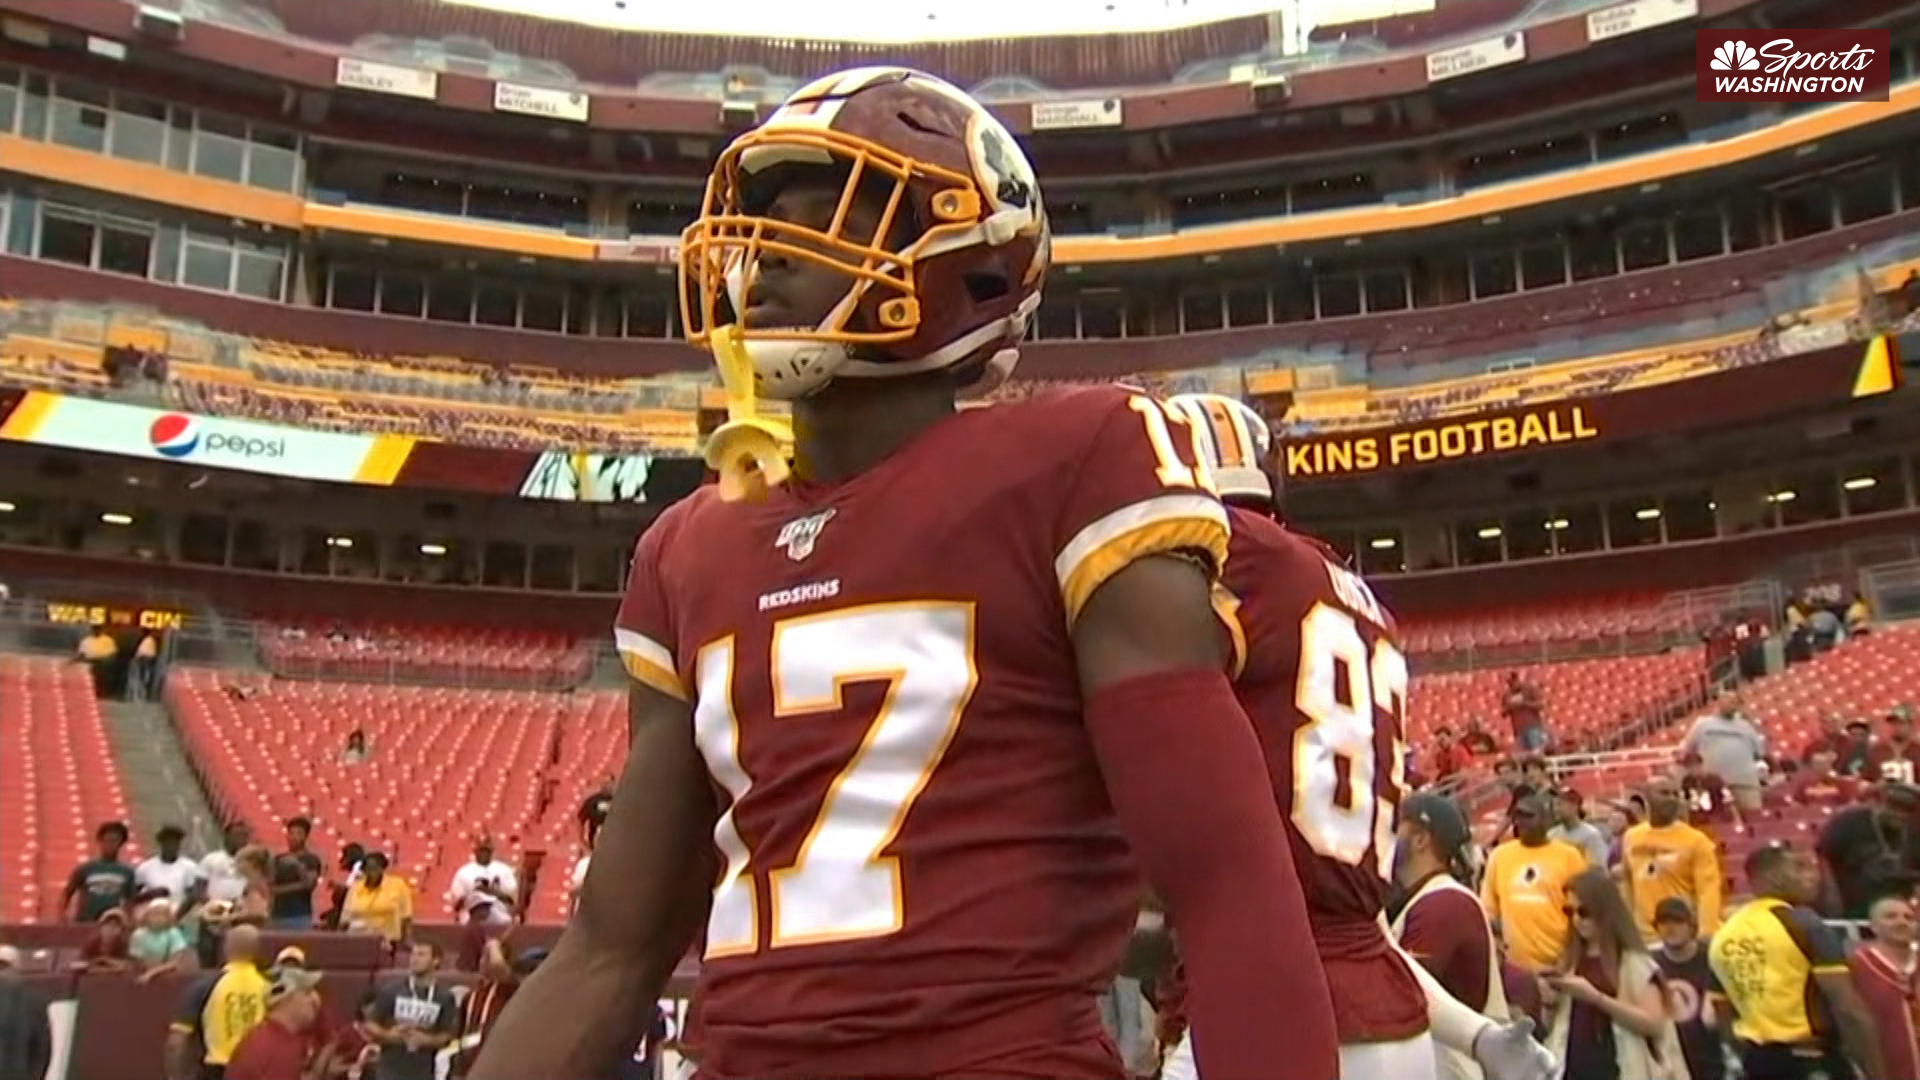 Redskins rookie WR Terry McLaurin expected to play Week 4 despite hamstring injury, per source